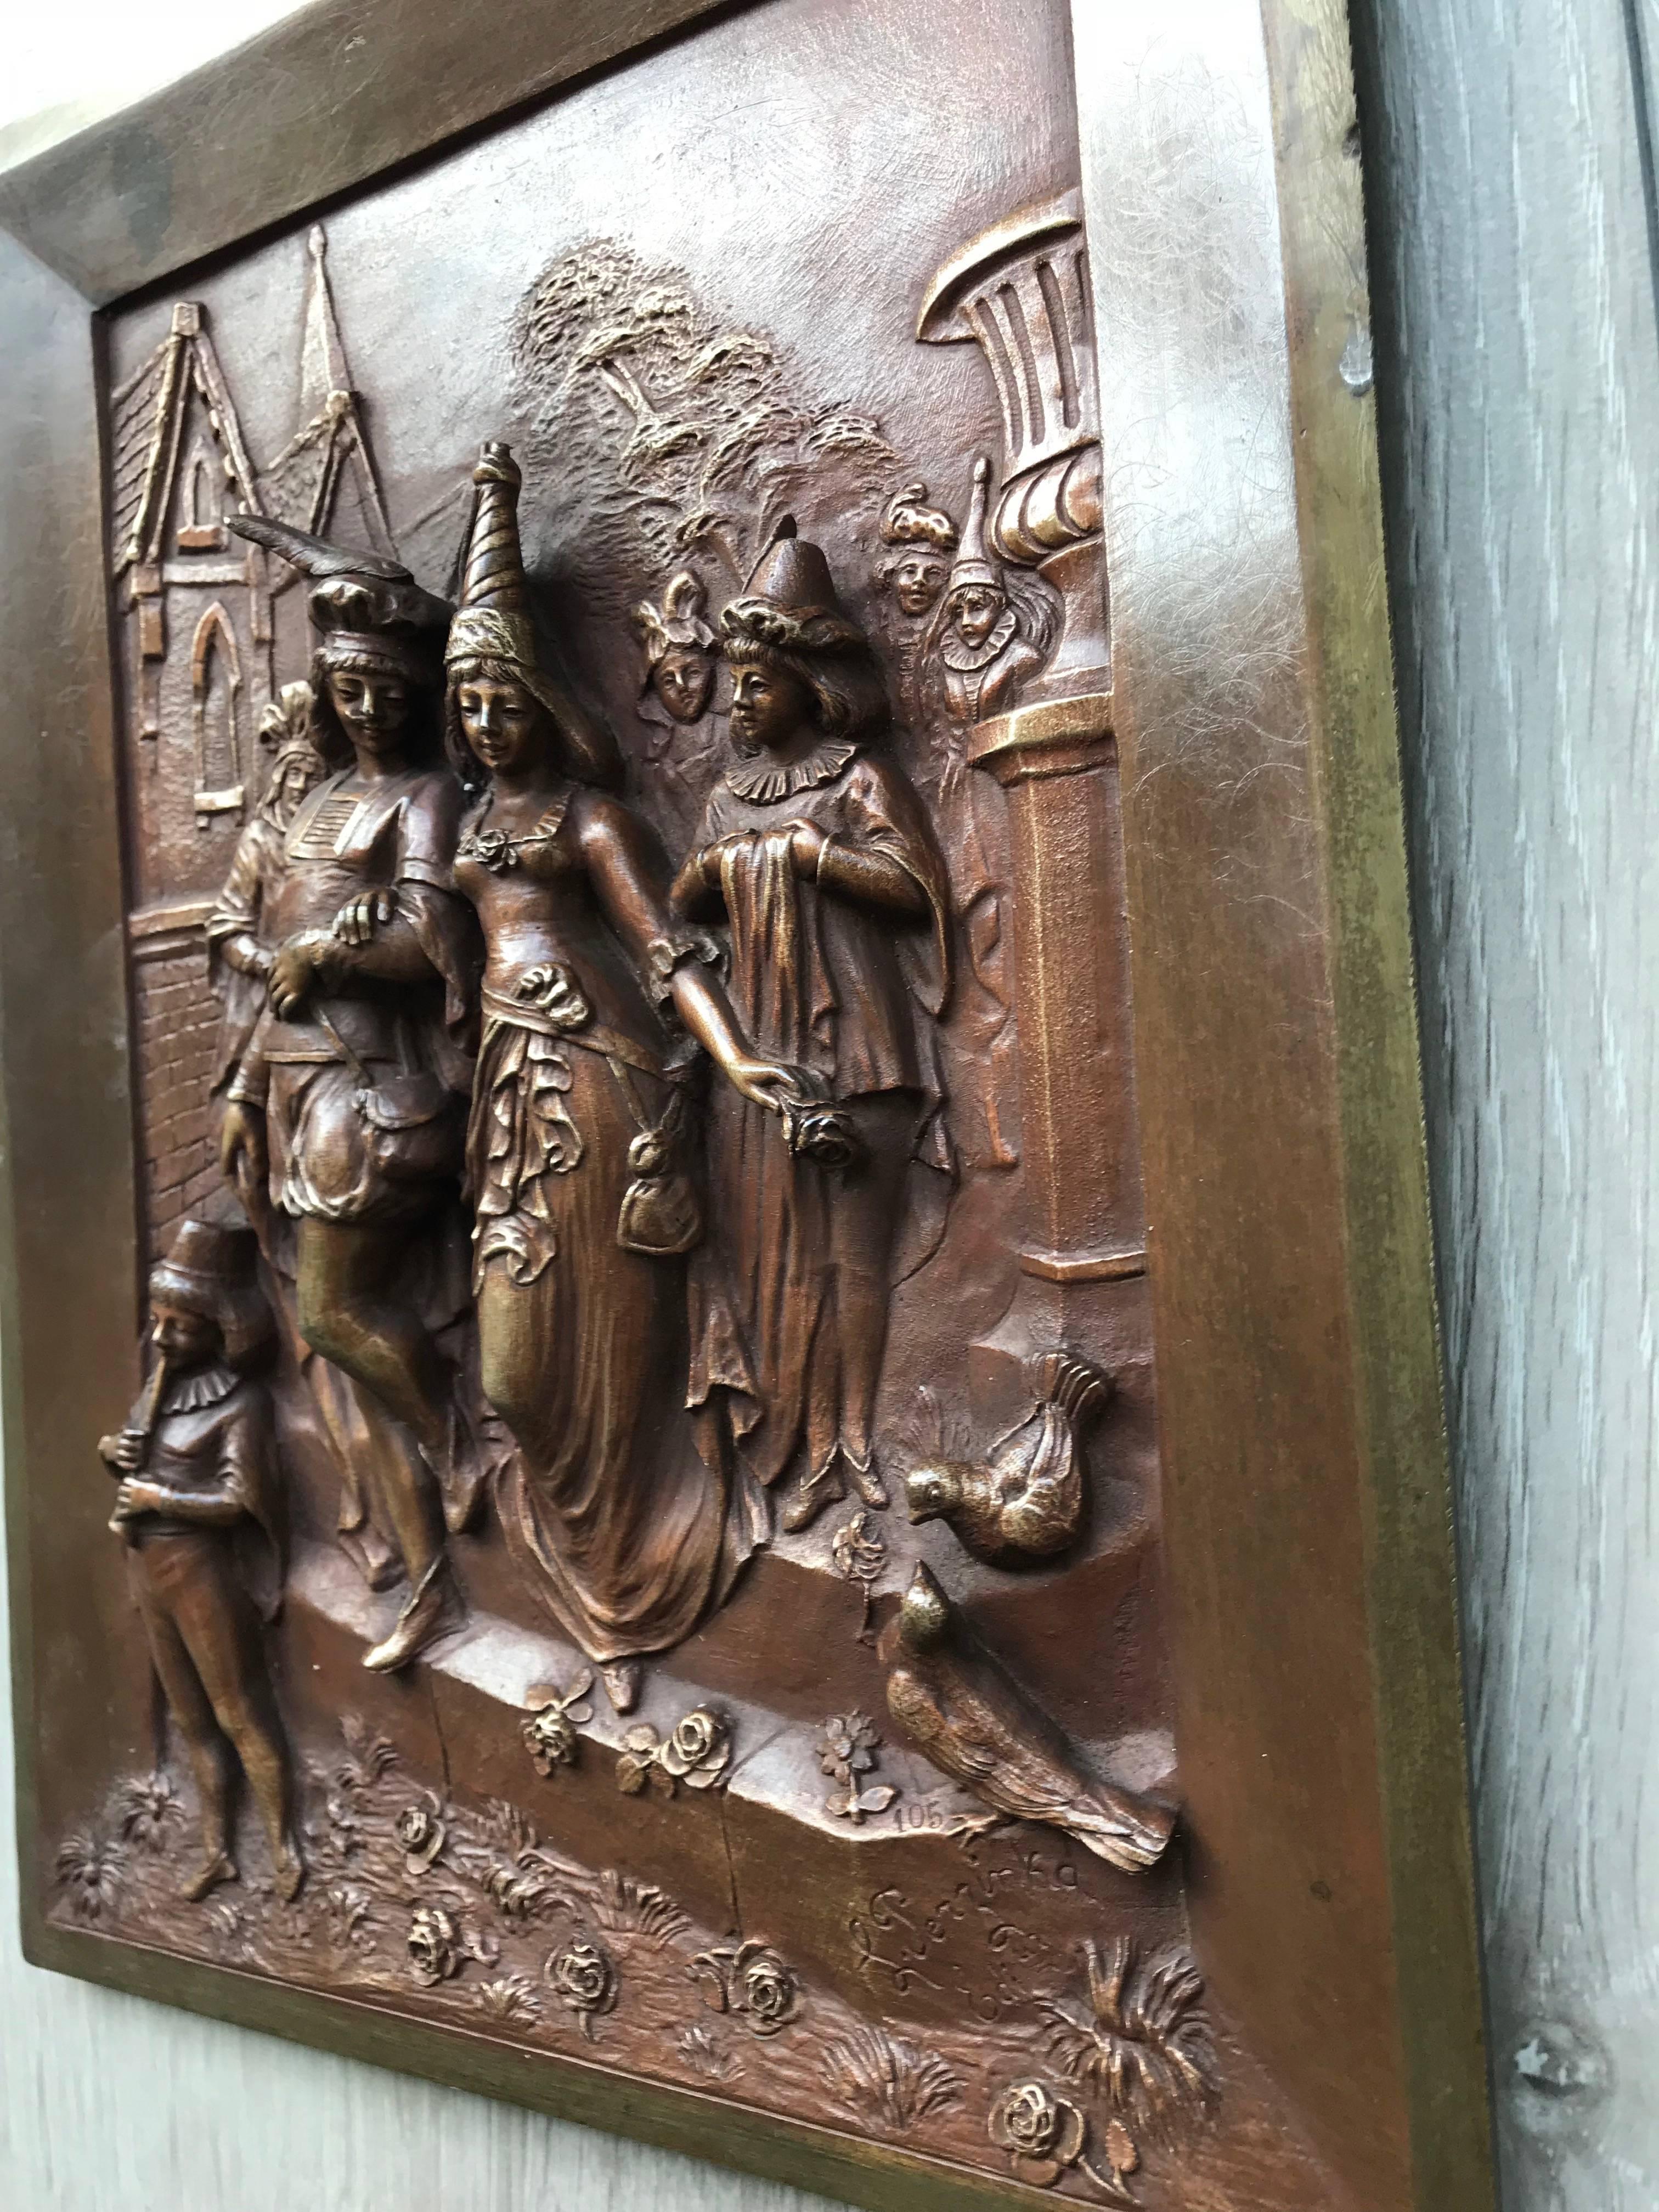 19th Century Late 1800s Bronze Wall Plaque by Leon Perzinka, Depicting Marriage Scene/Party